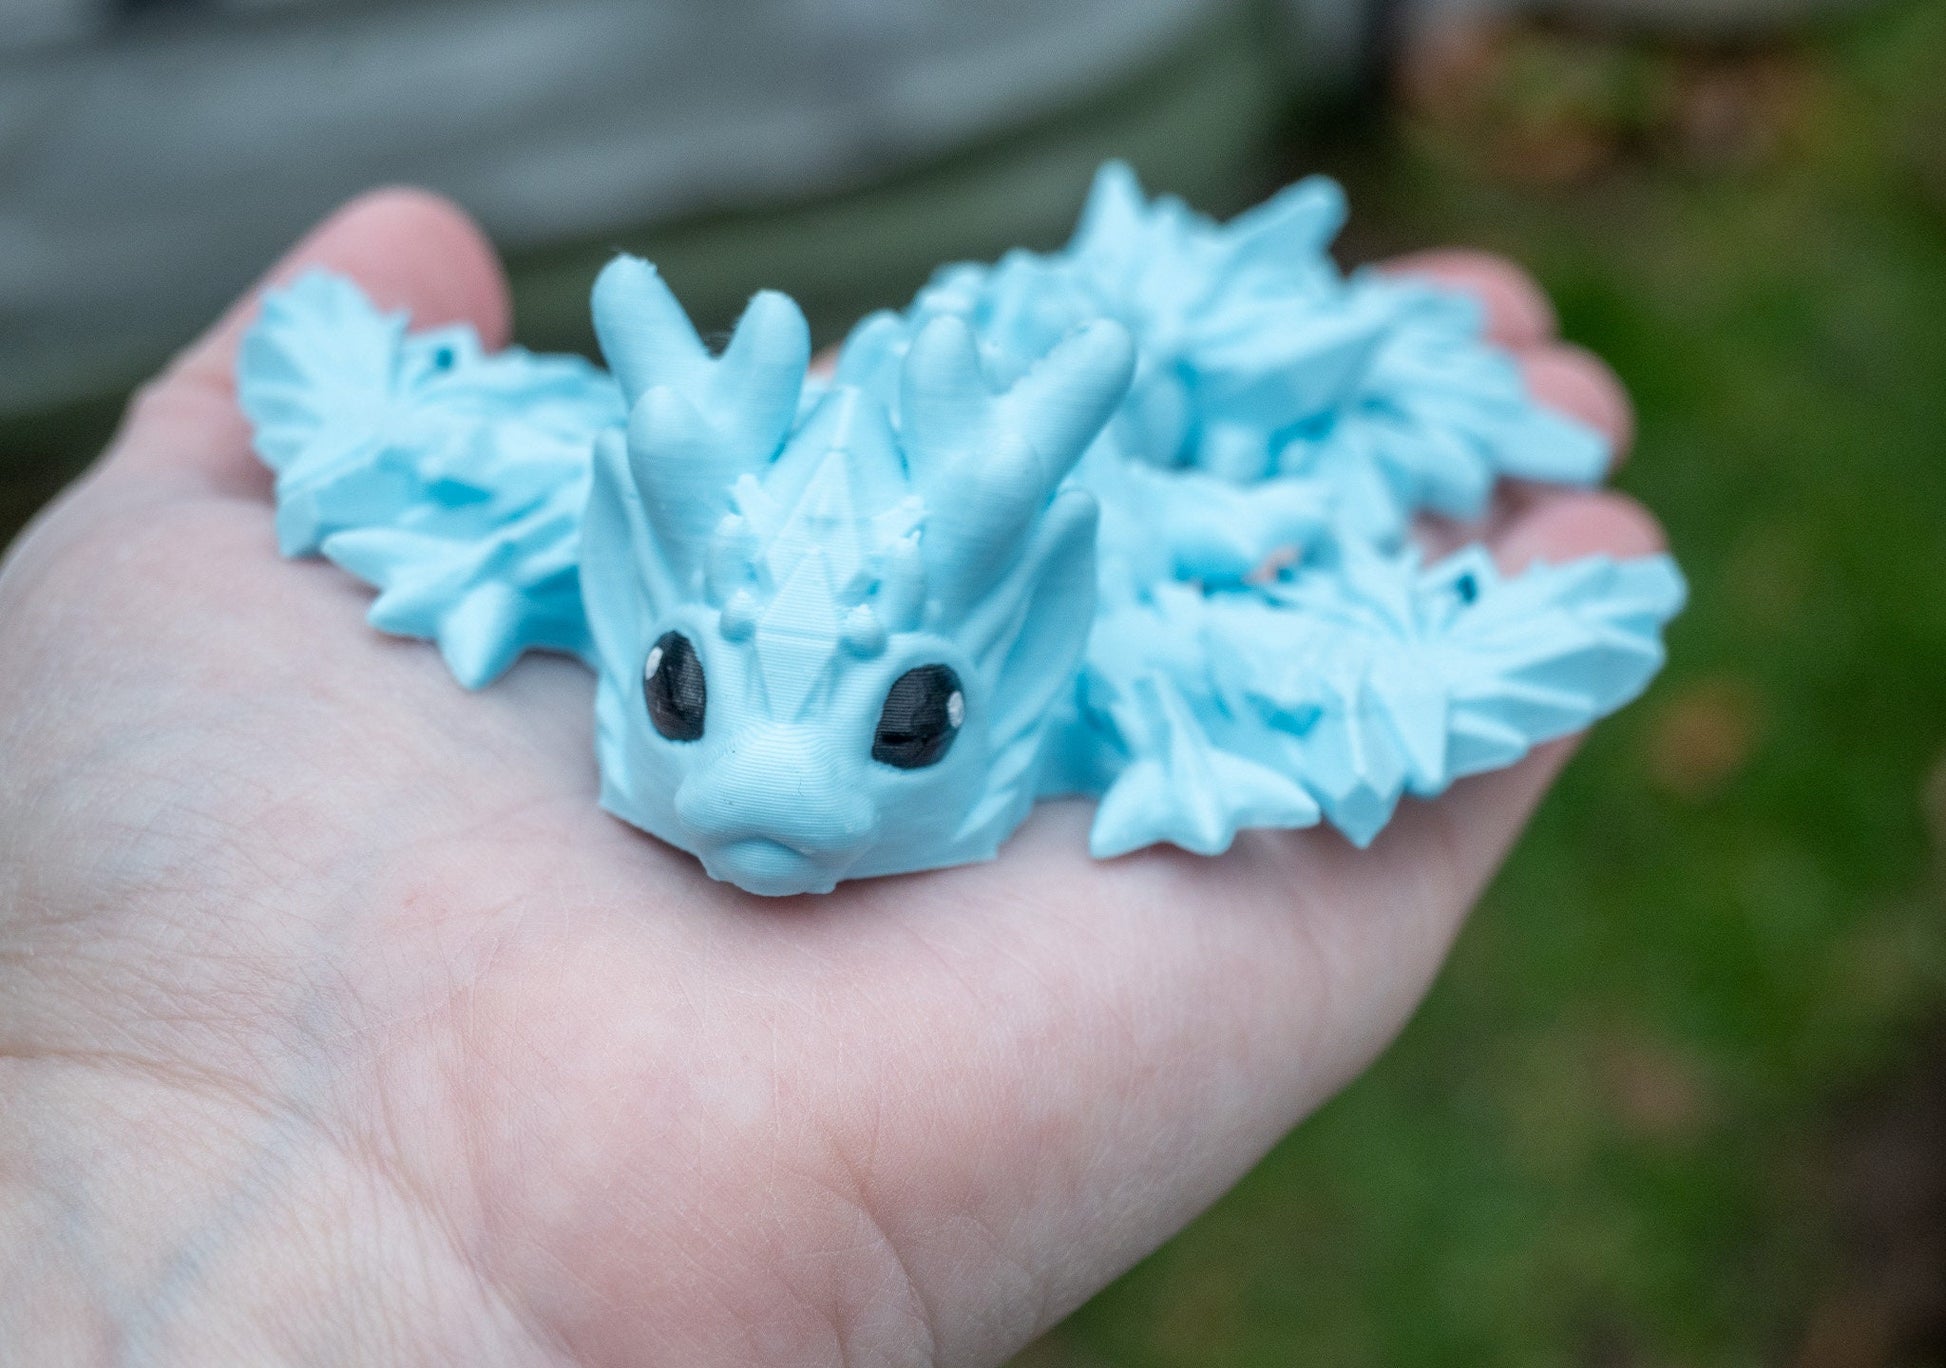 3D Printed Baby Snow Dragon - Articulating, Flexi Dragon Toy